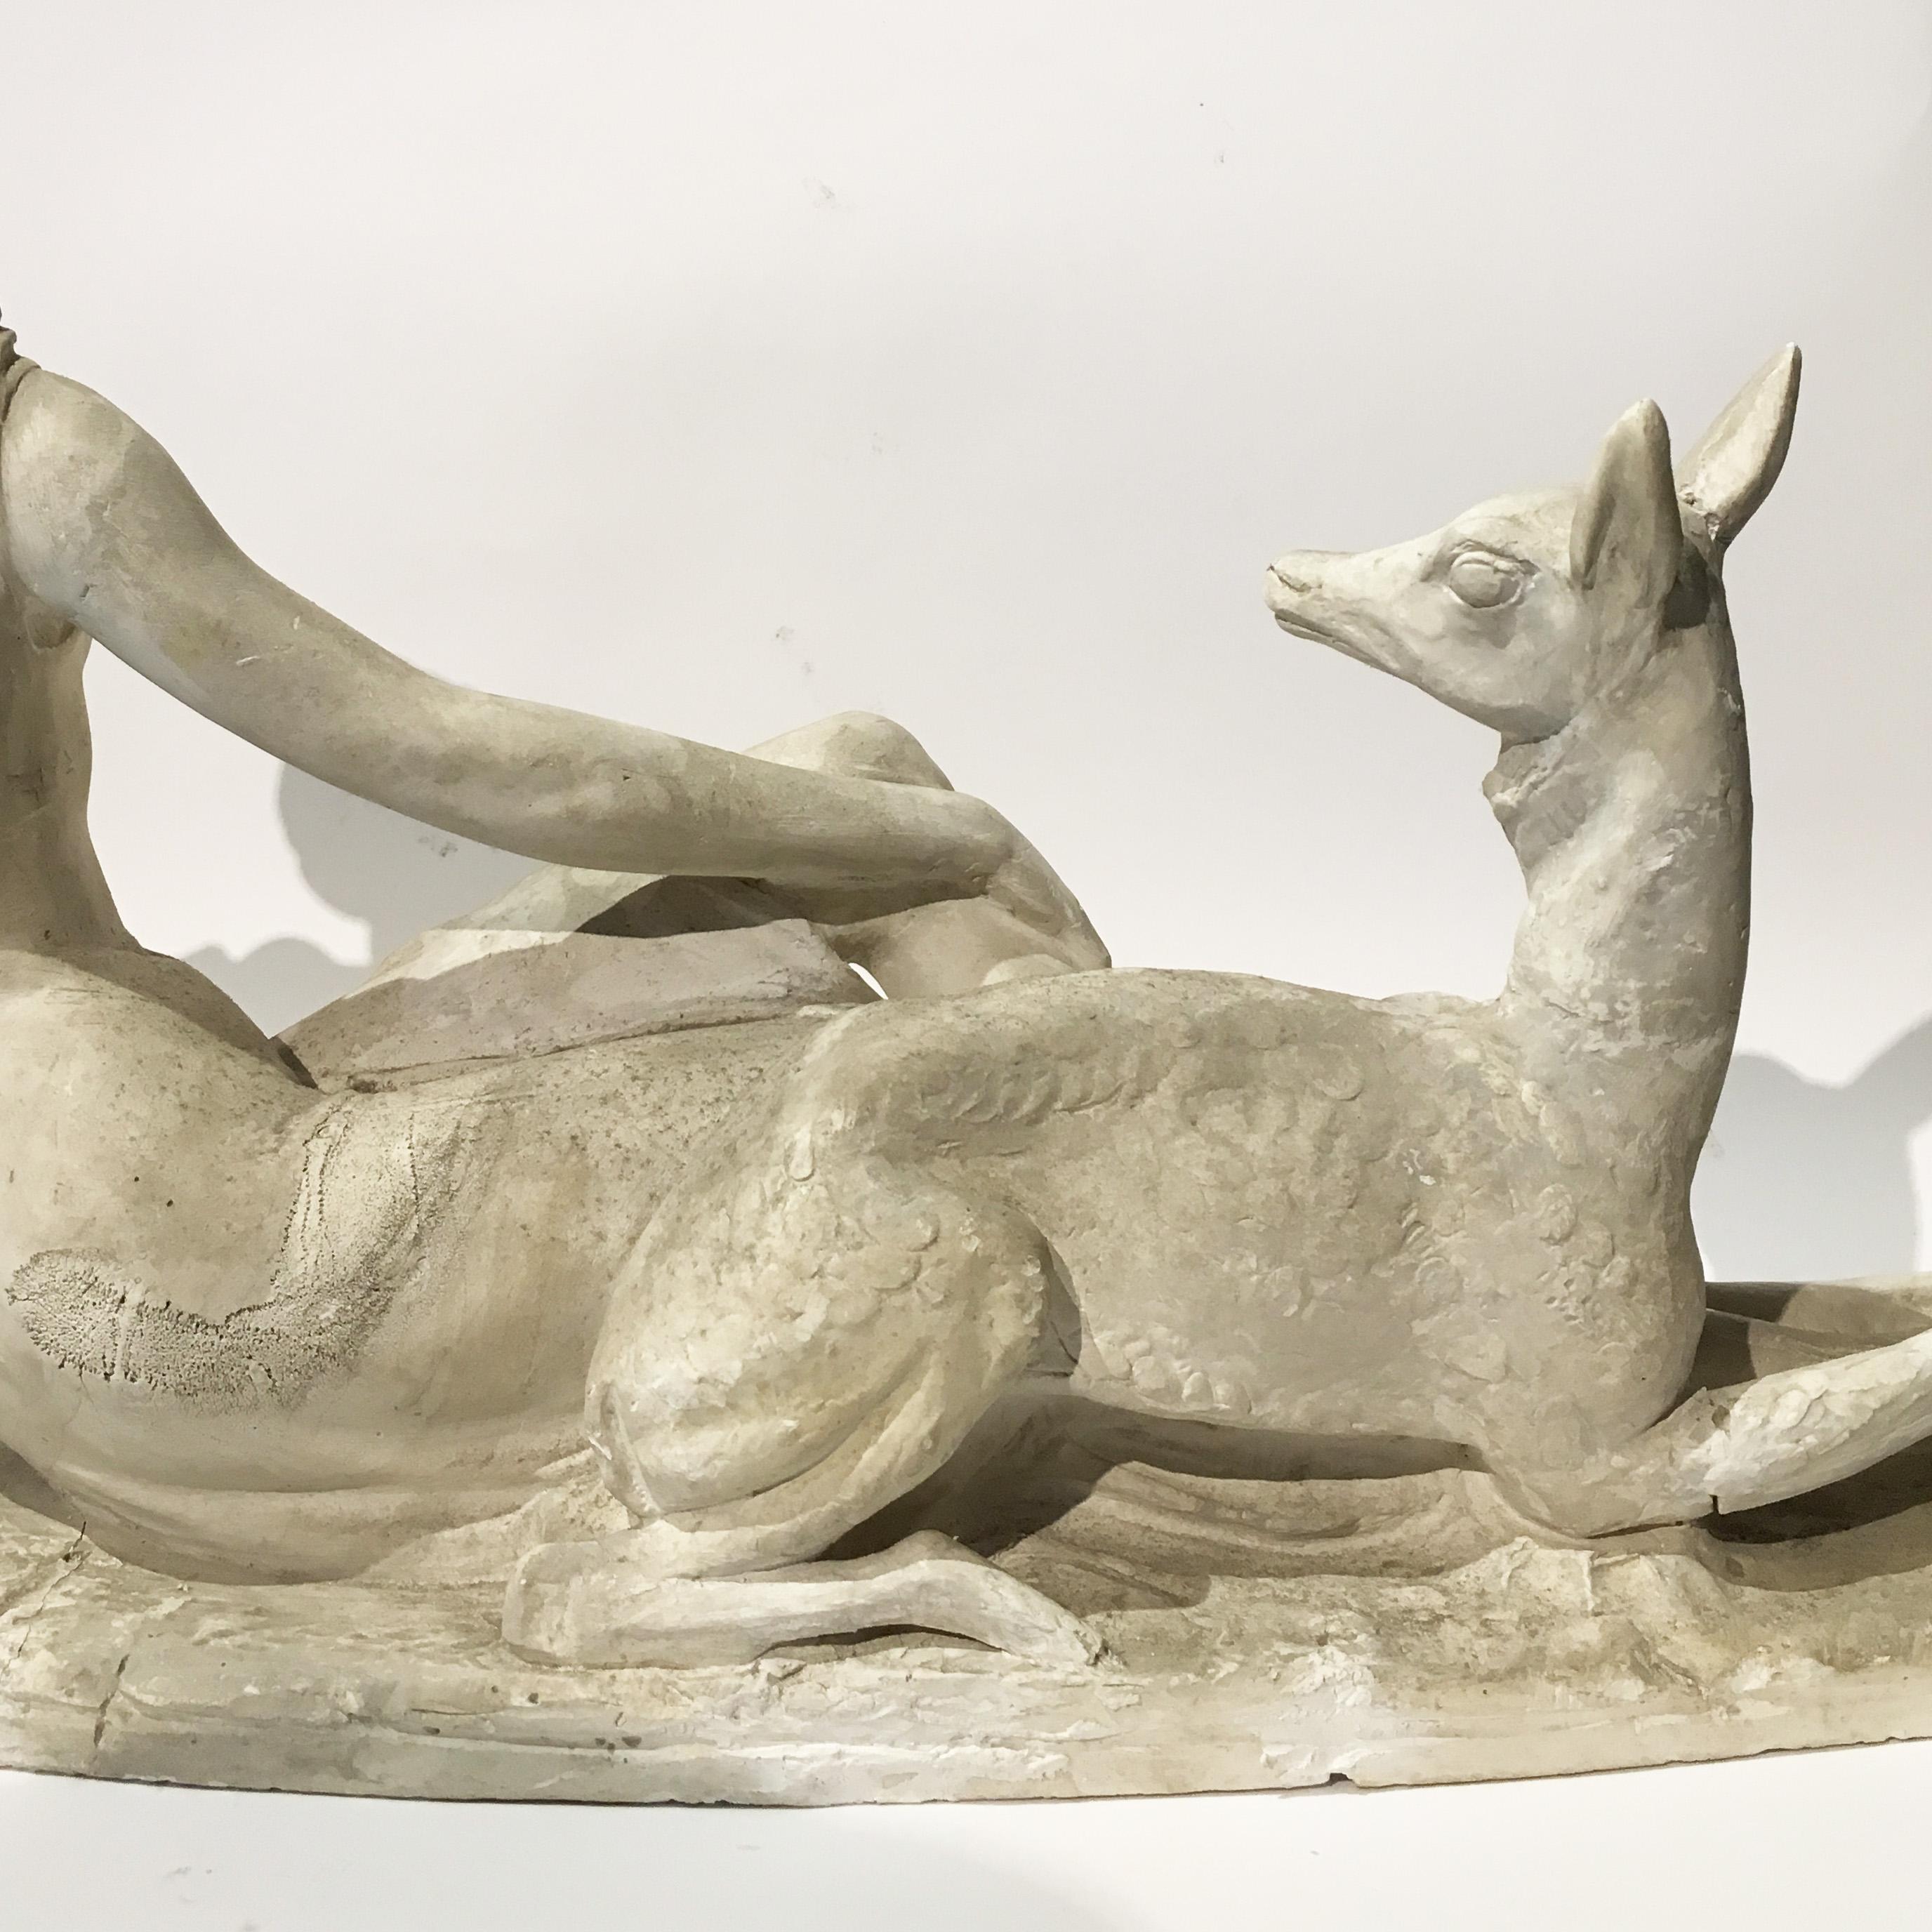 Early 20th Century Italian Art Deco Plaster Sculpture by Mario Bandini For Sale 11